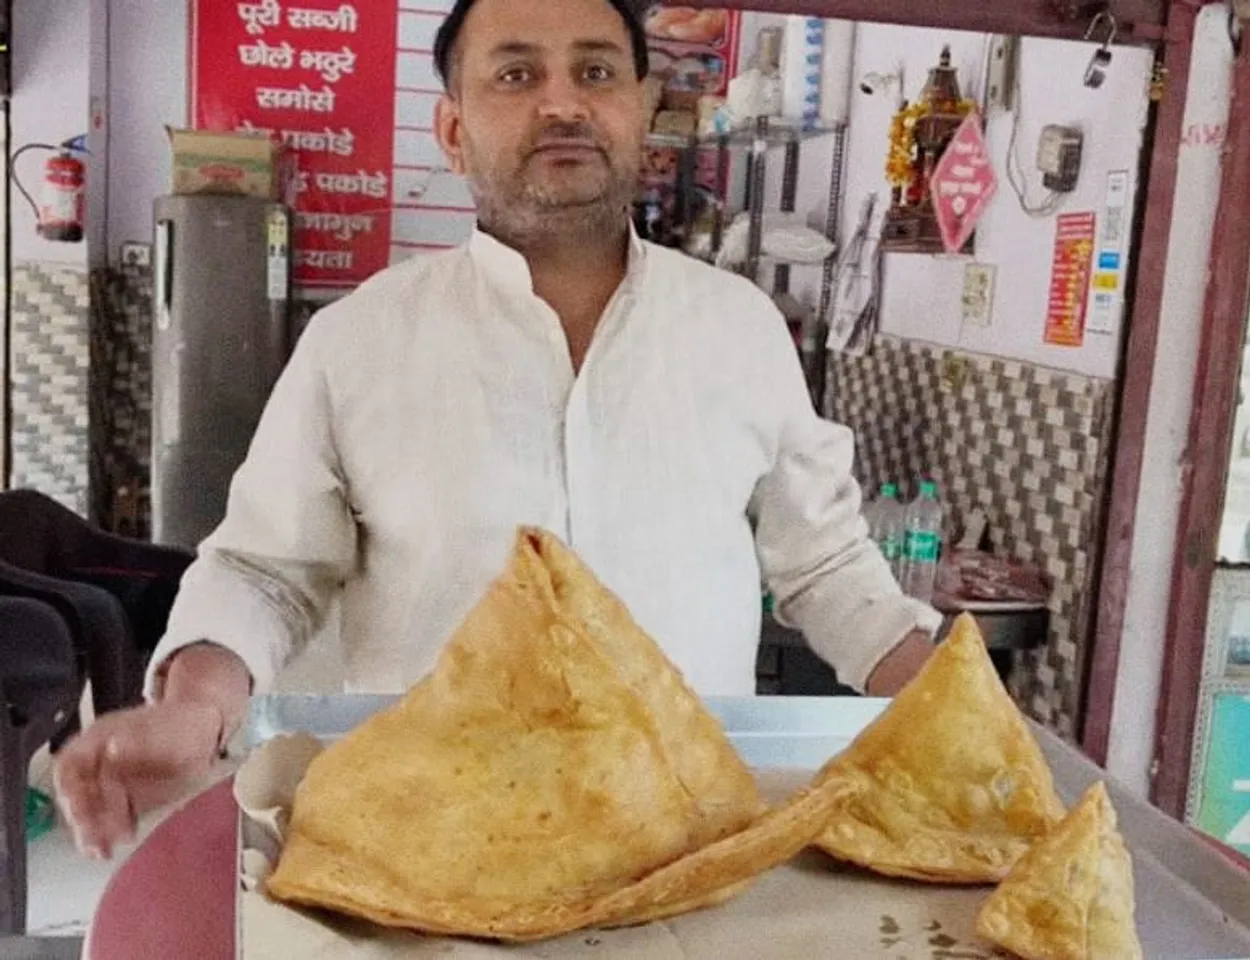 These biggest samosas are sure to satiate all your samosa cravings!